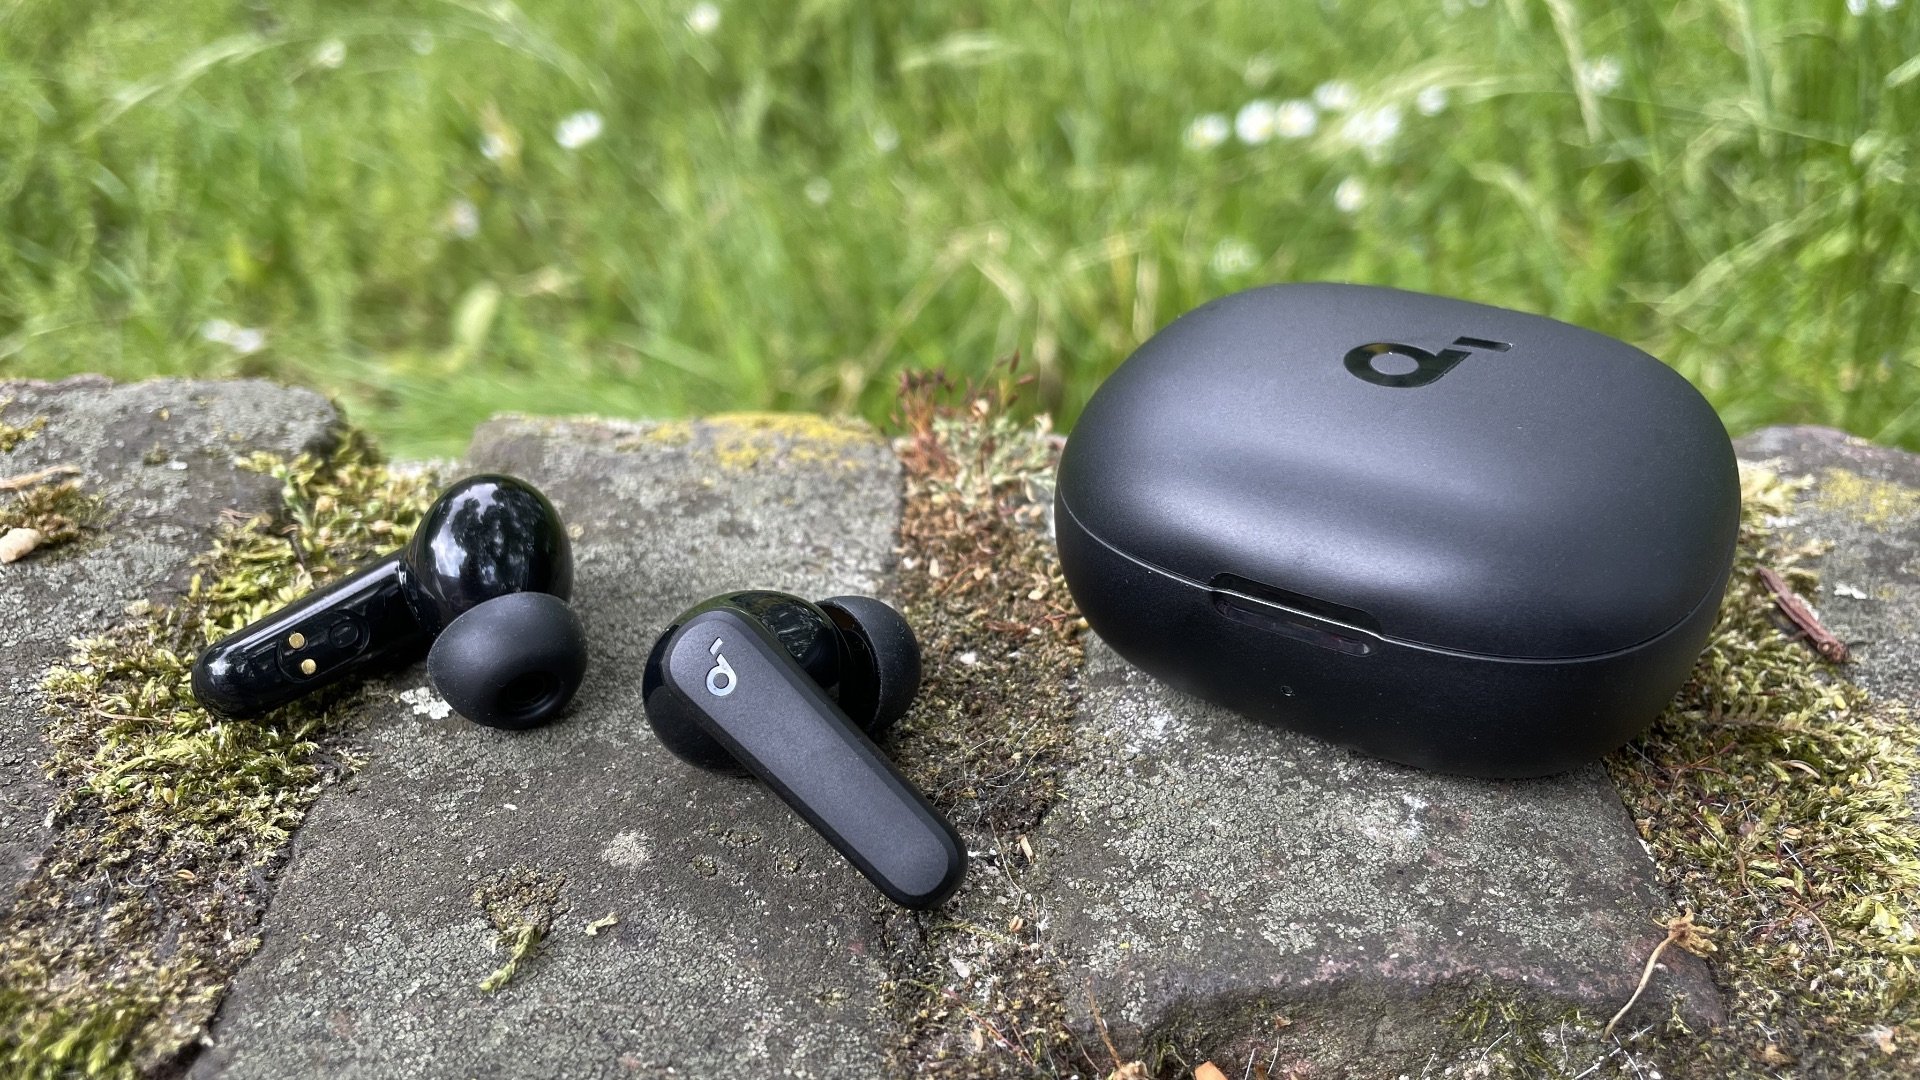 Anker Soundcore P20i Review: affordable earbuds that sound great